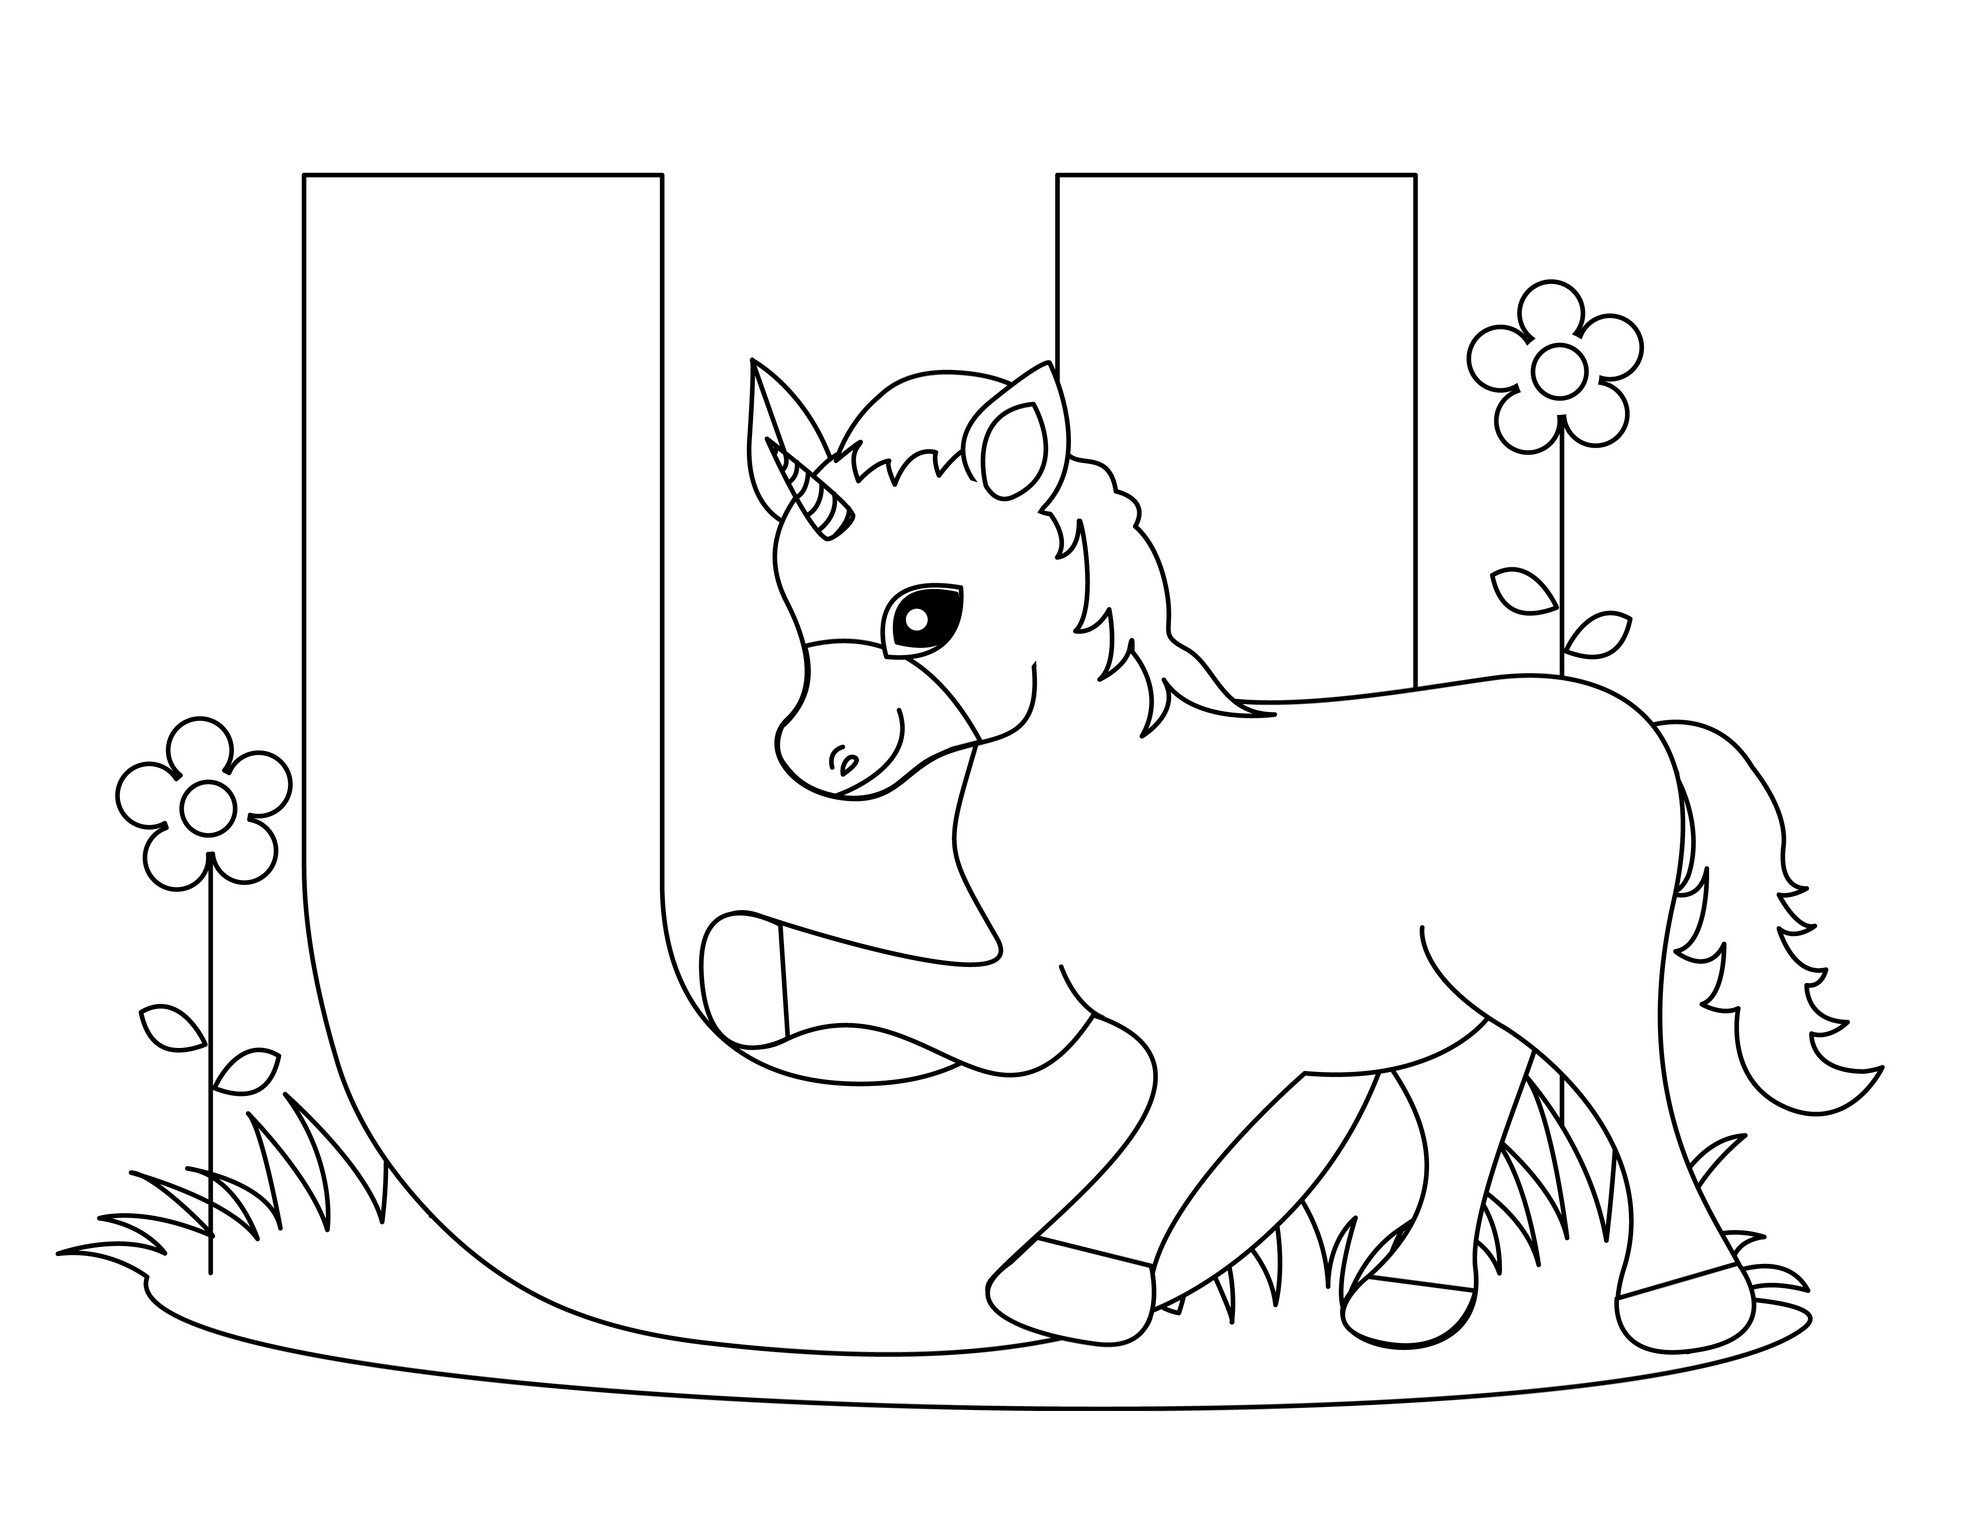 Download Free Printable Alphabet Coloring Pages for Kids - Best ...